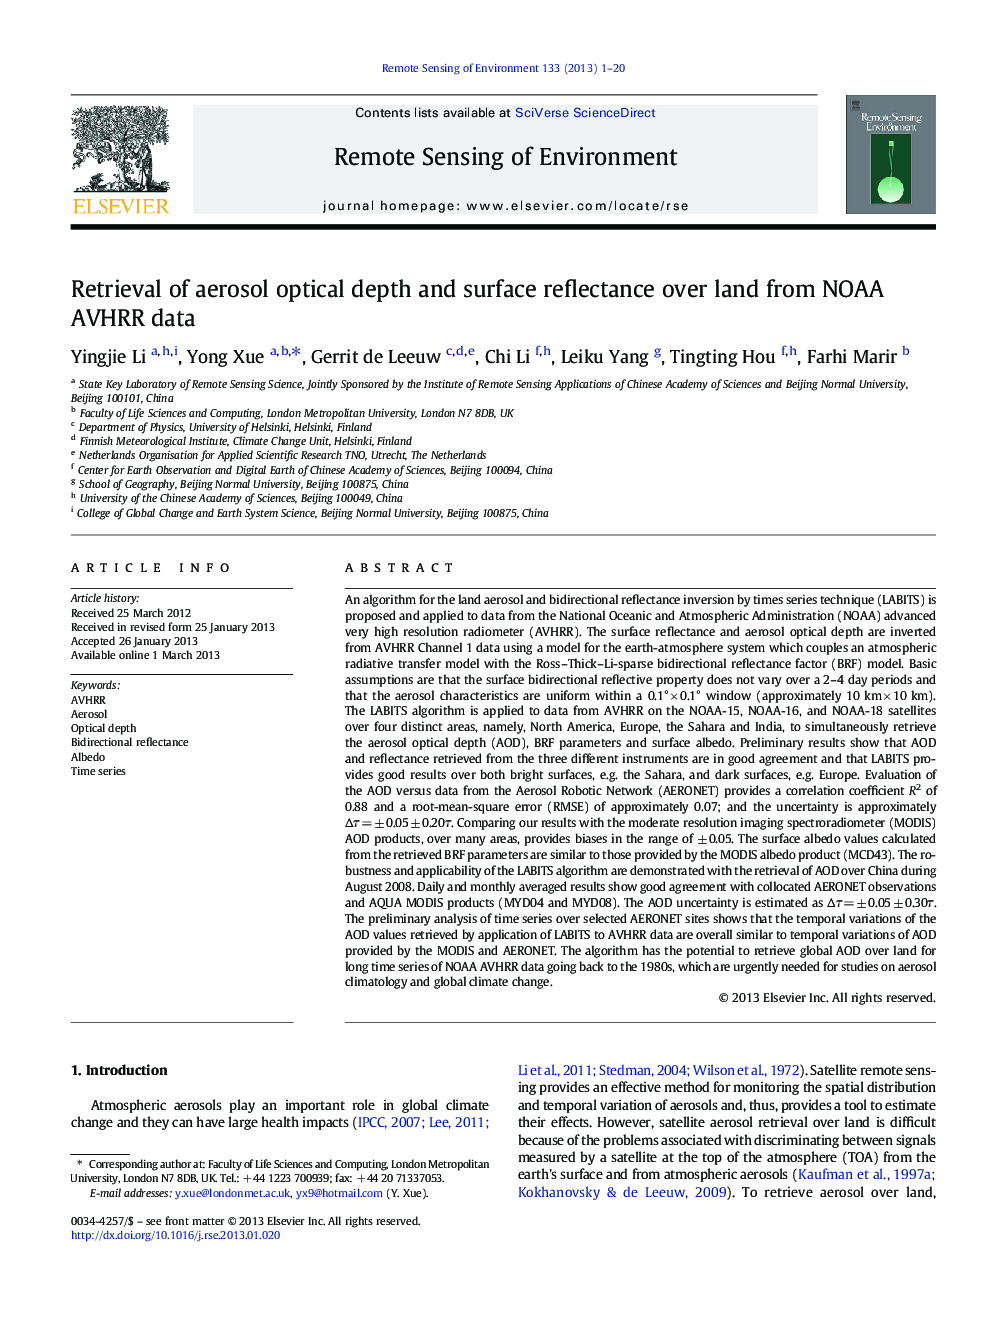 Retrieval of aerosol optical depth and surface reflectance over land from NOAA AVHRR data